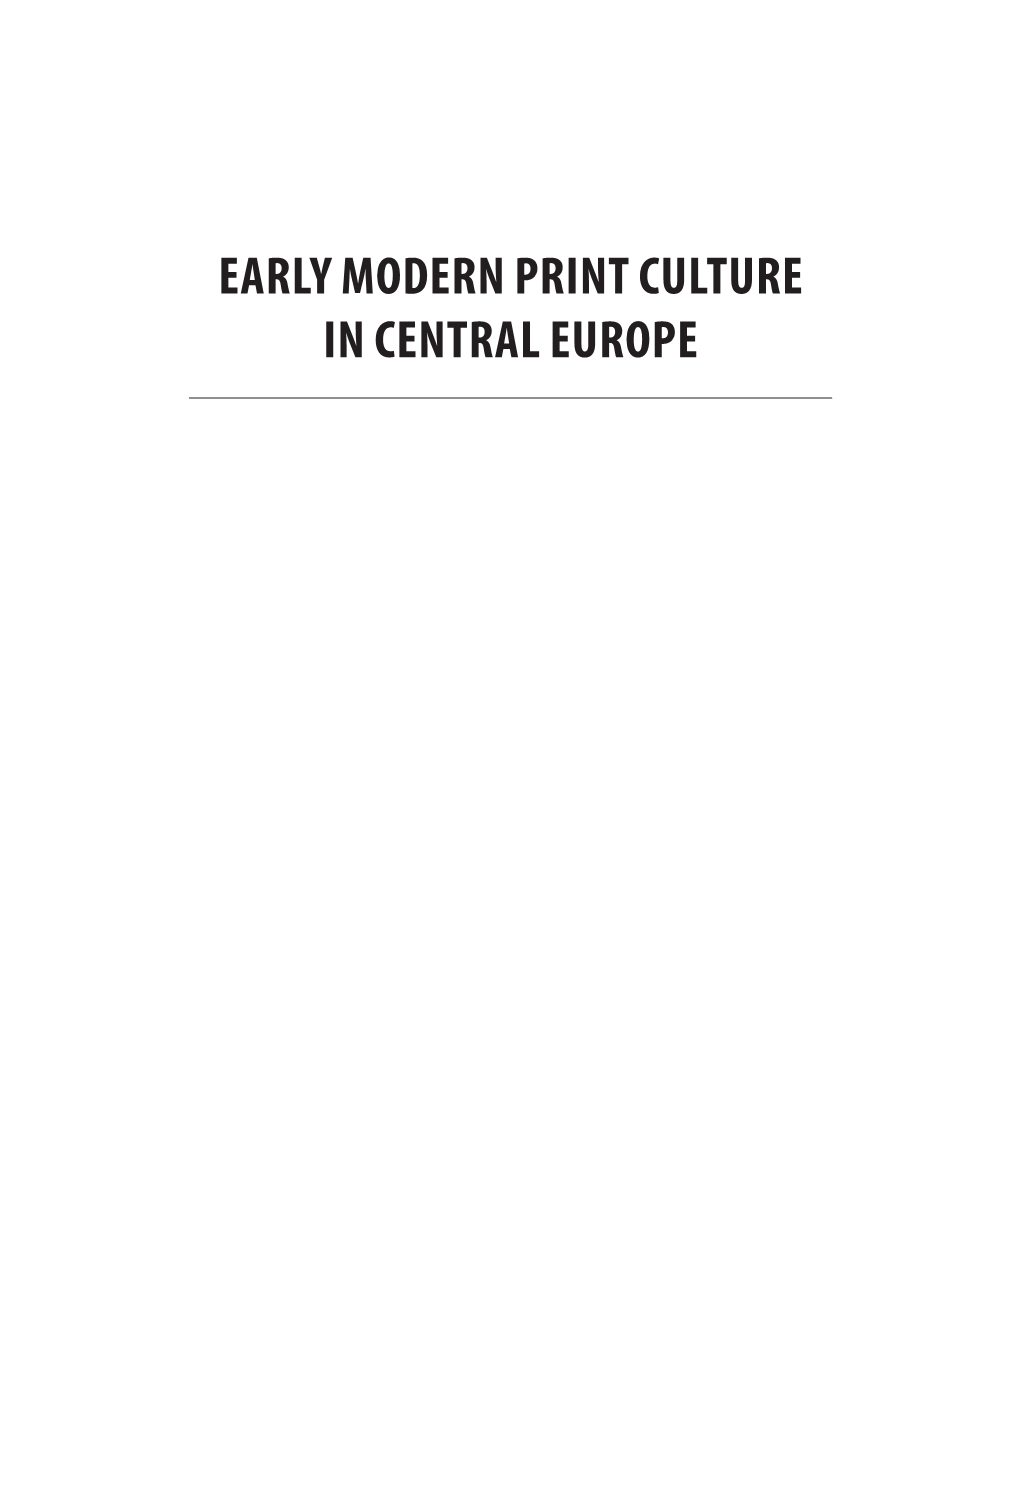 Early Modern Print Culture in Central Europe